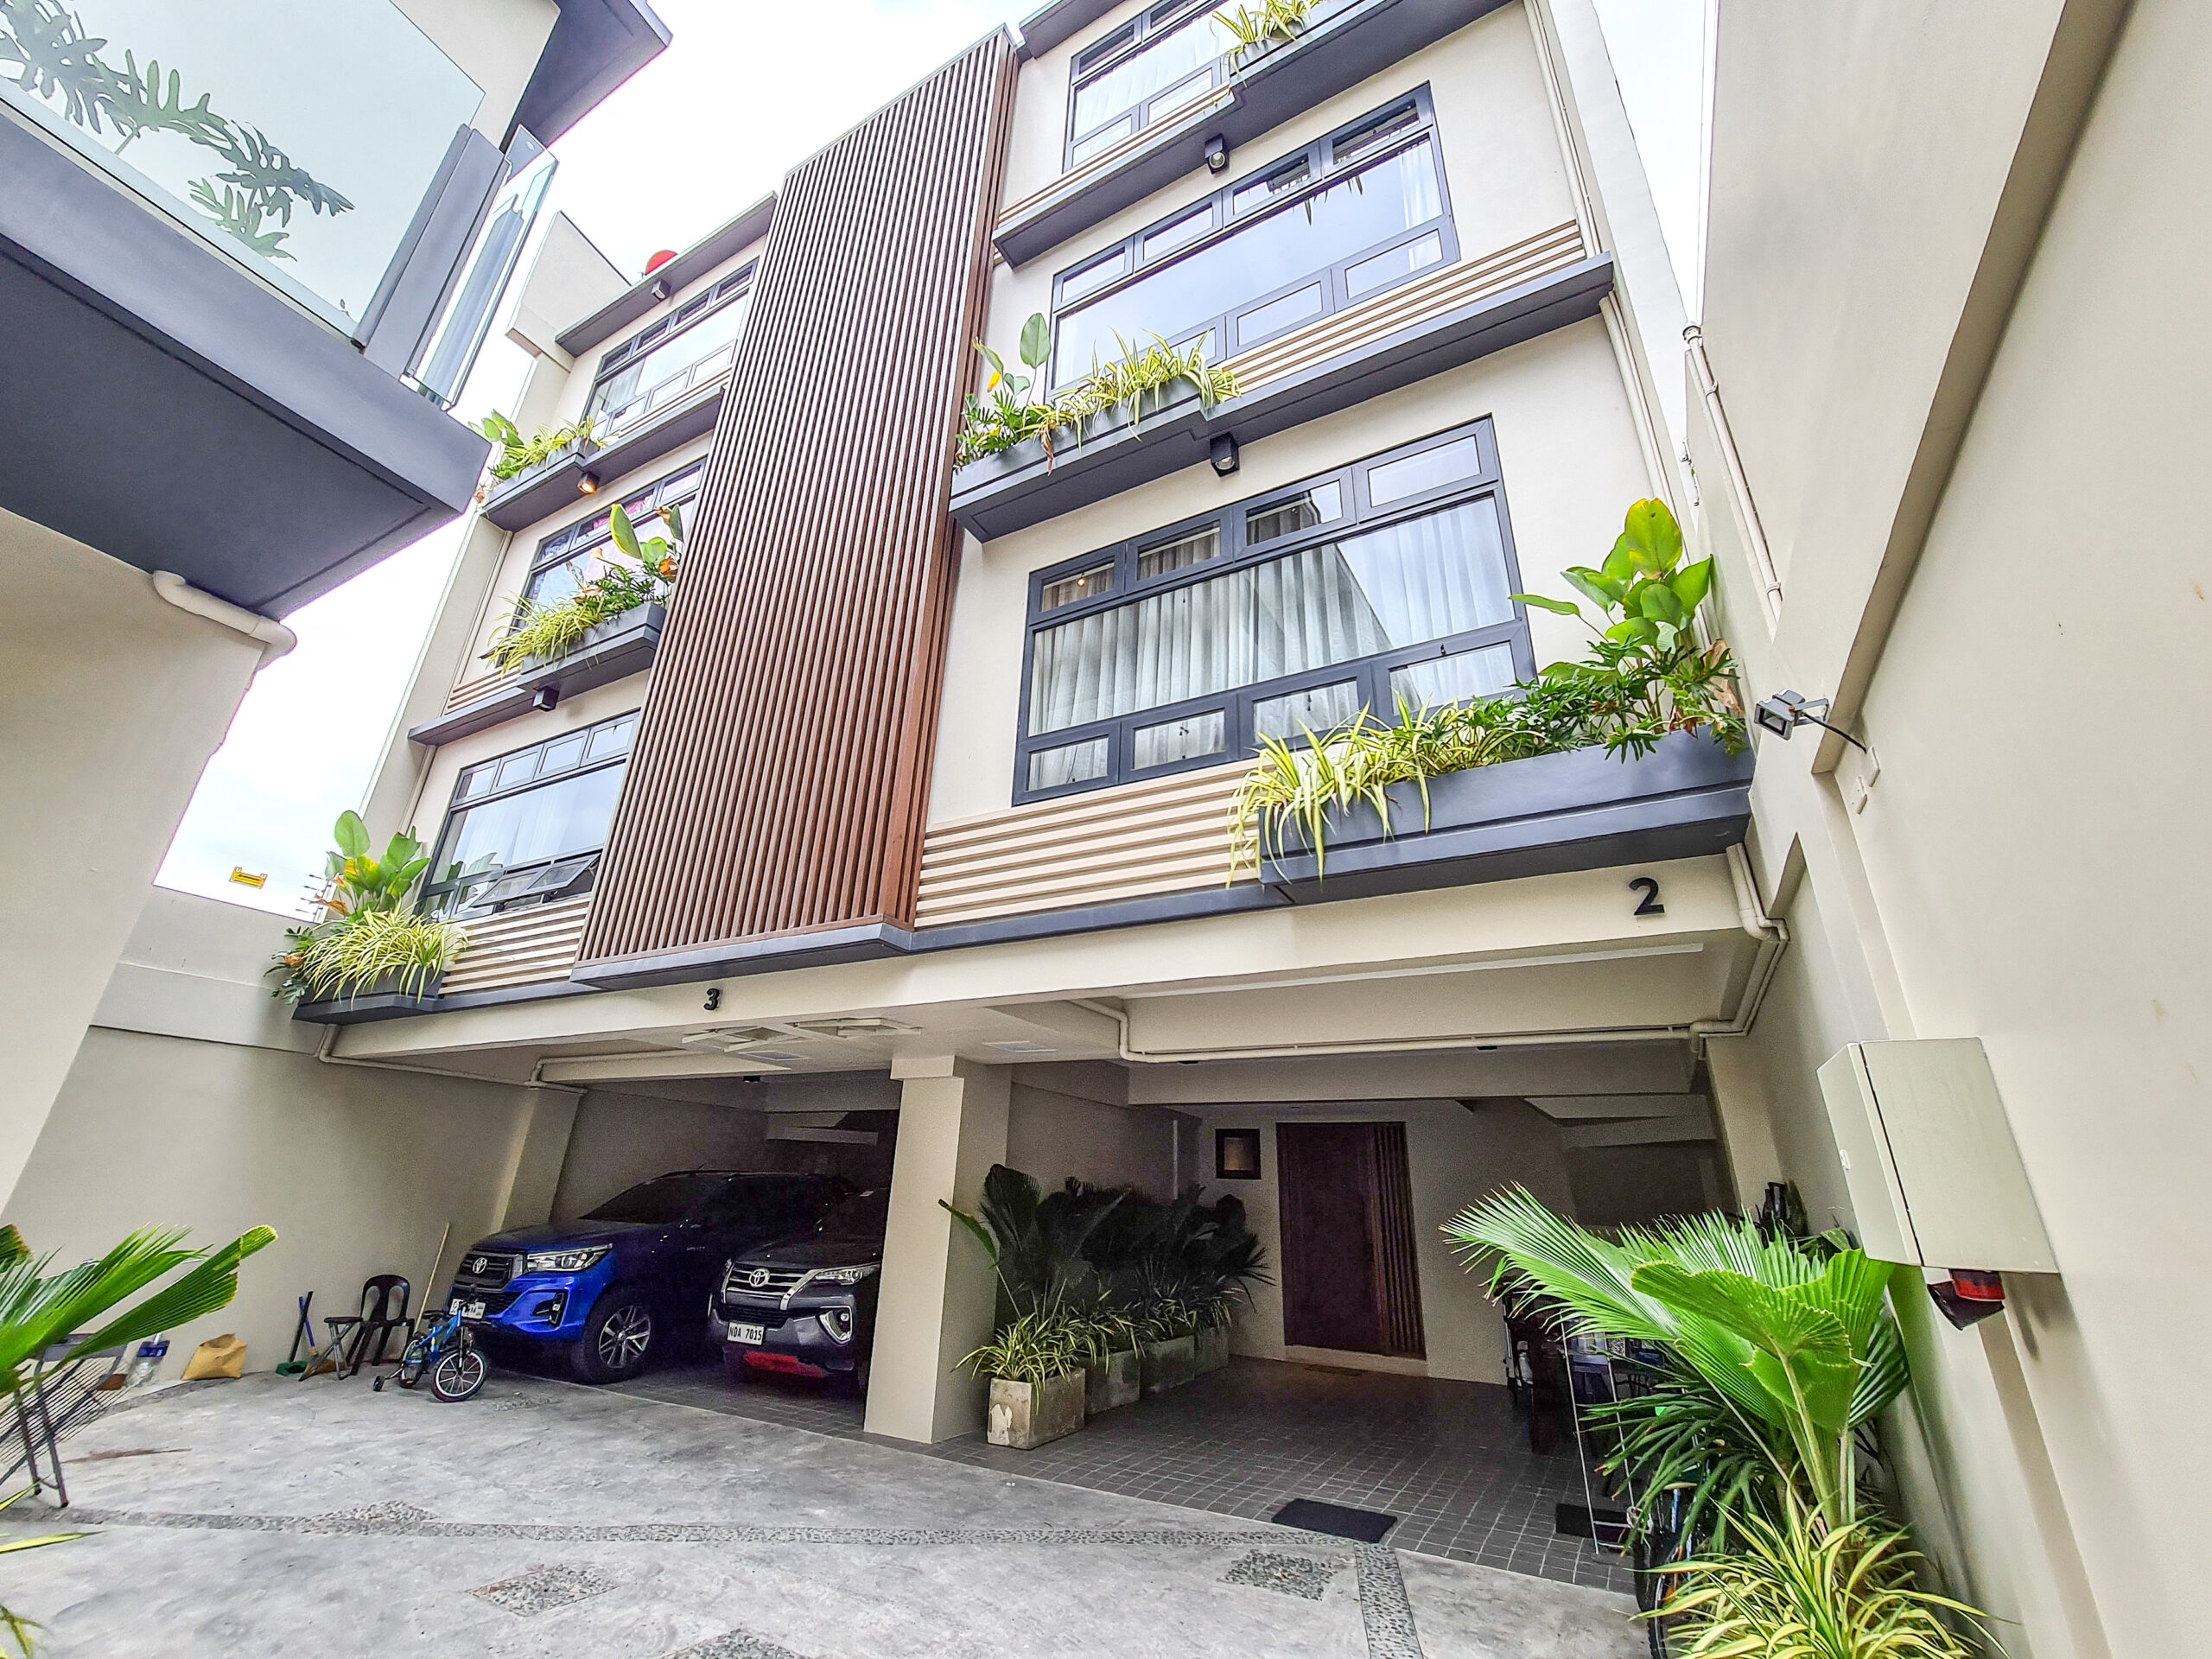 A Rewarding Sweet Living Experience in this High-end 3 Story Townhouse situated in New Zañiga, Mandaluyong City.